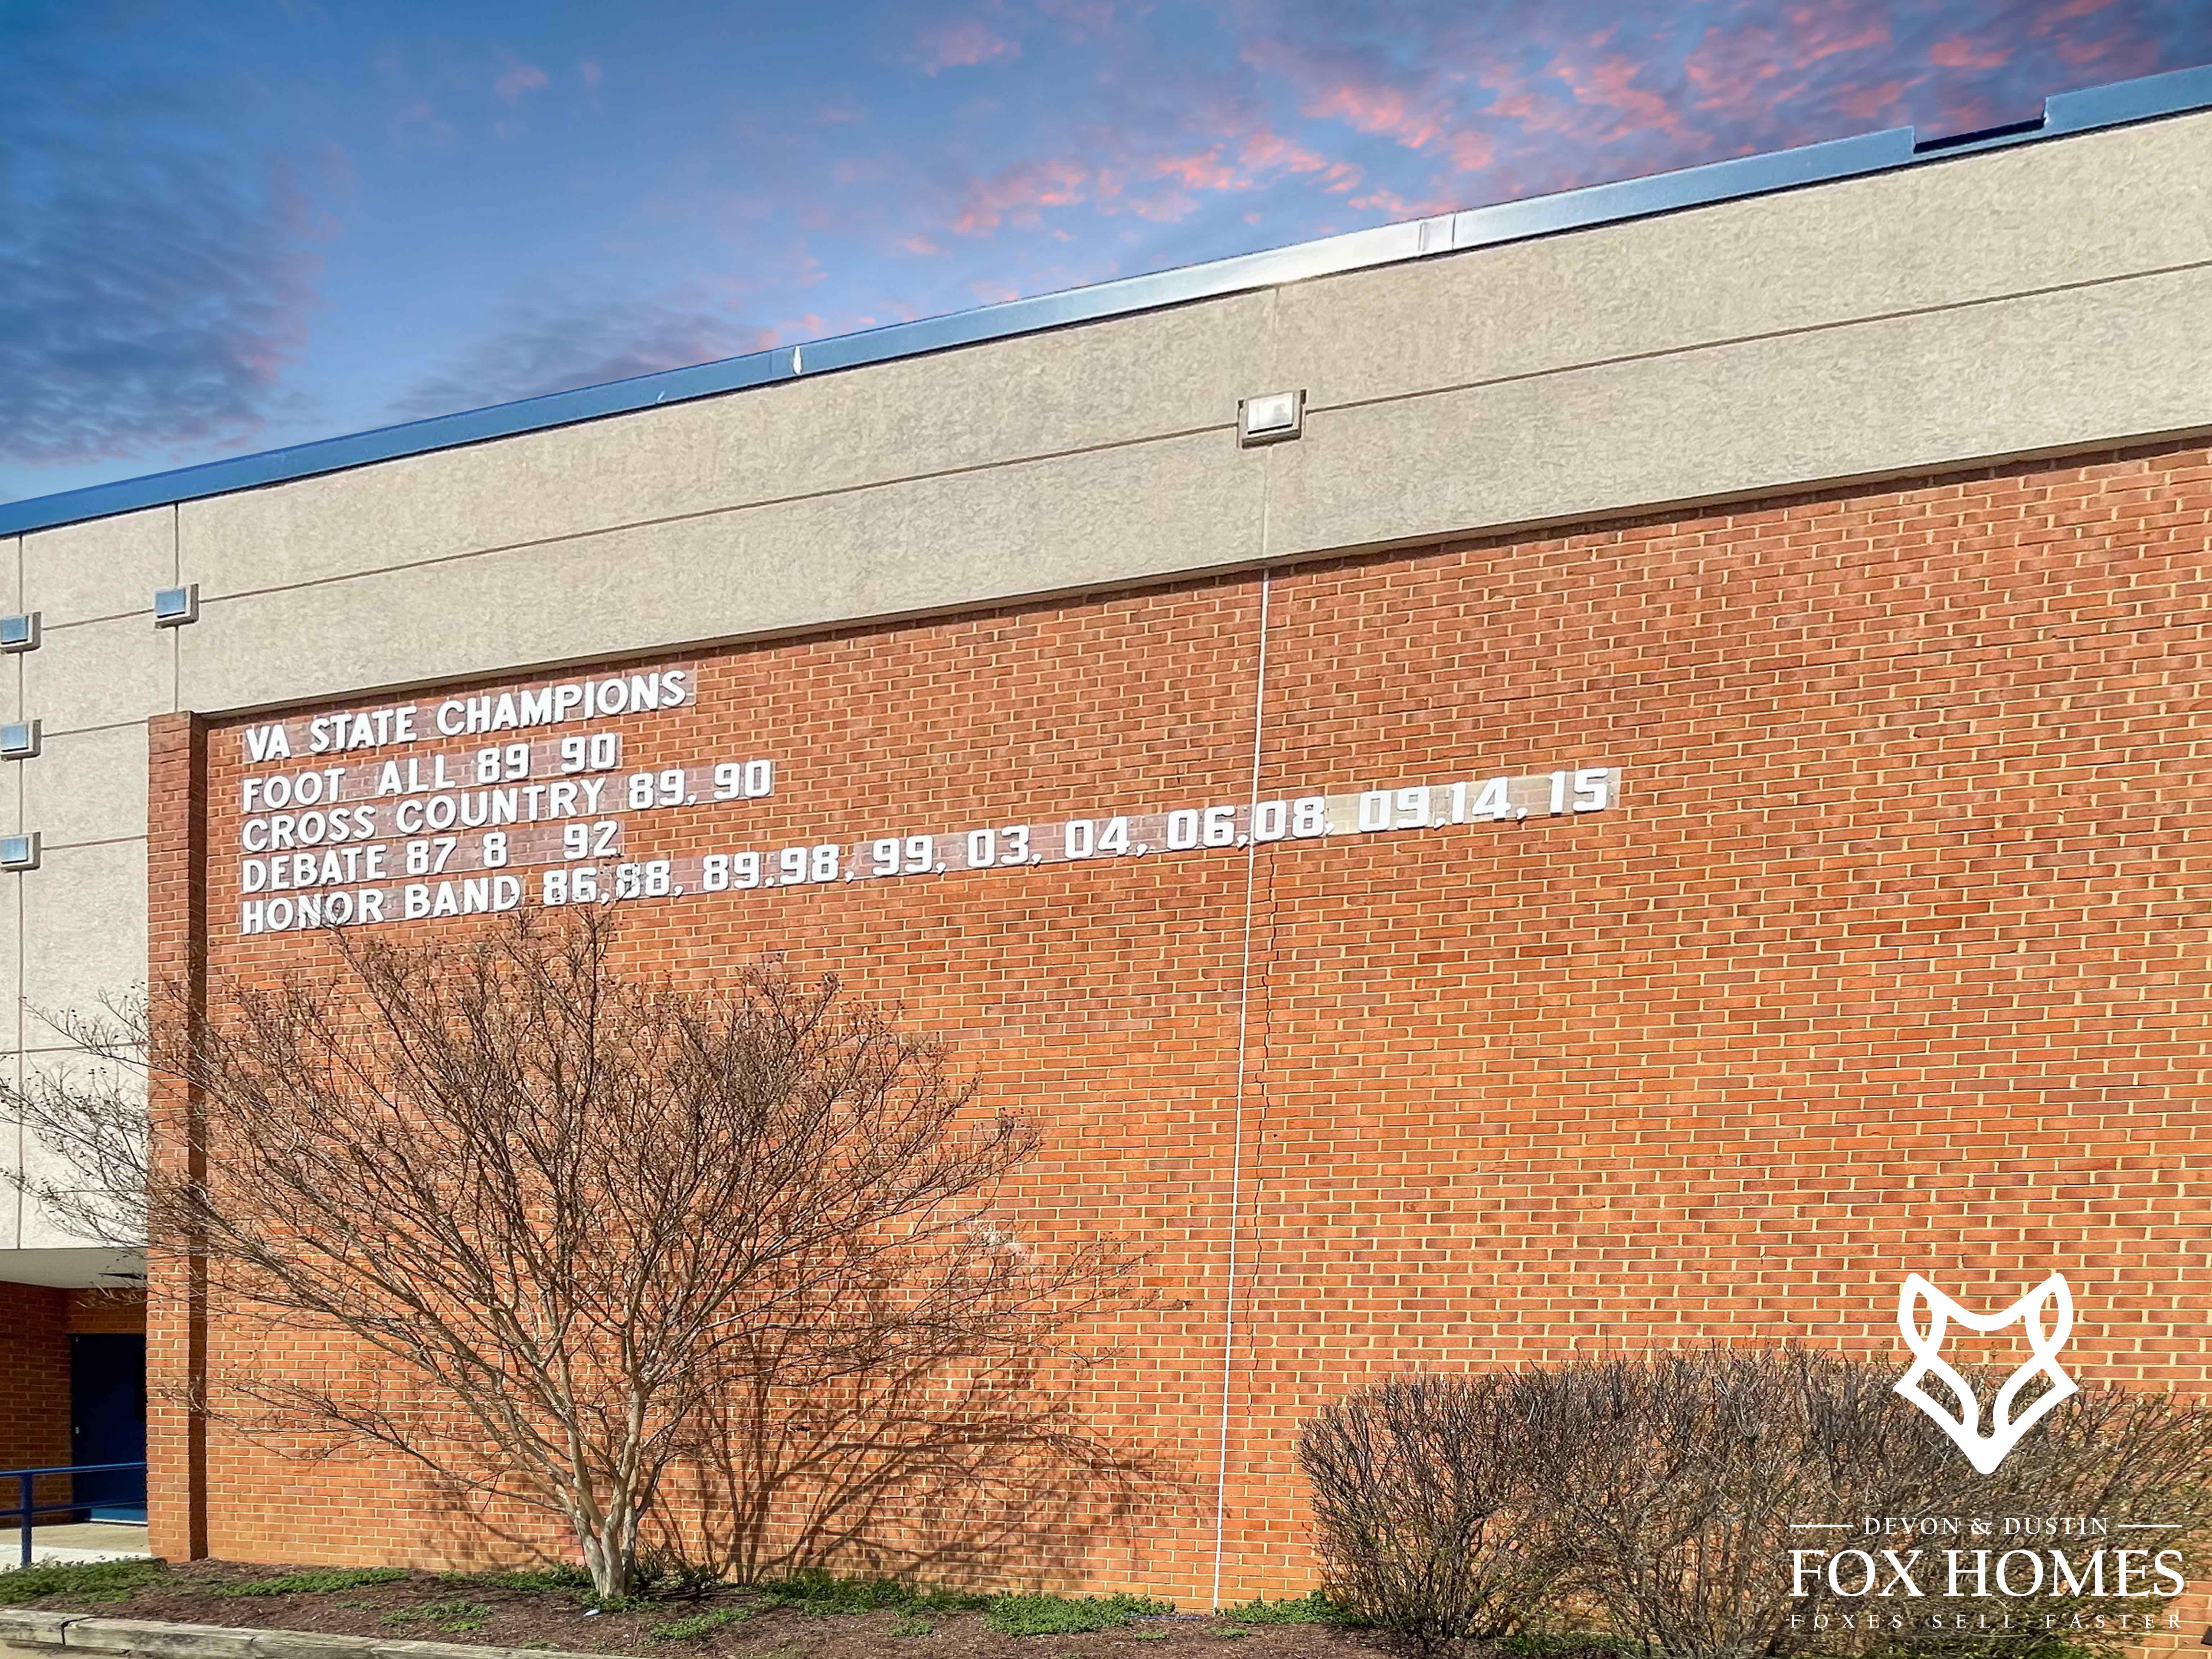 homes-for-sale-in-west-potomac-high-school-district-devon-and-dustin-fox-homes-awards